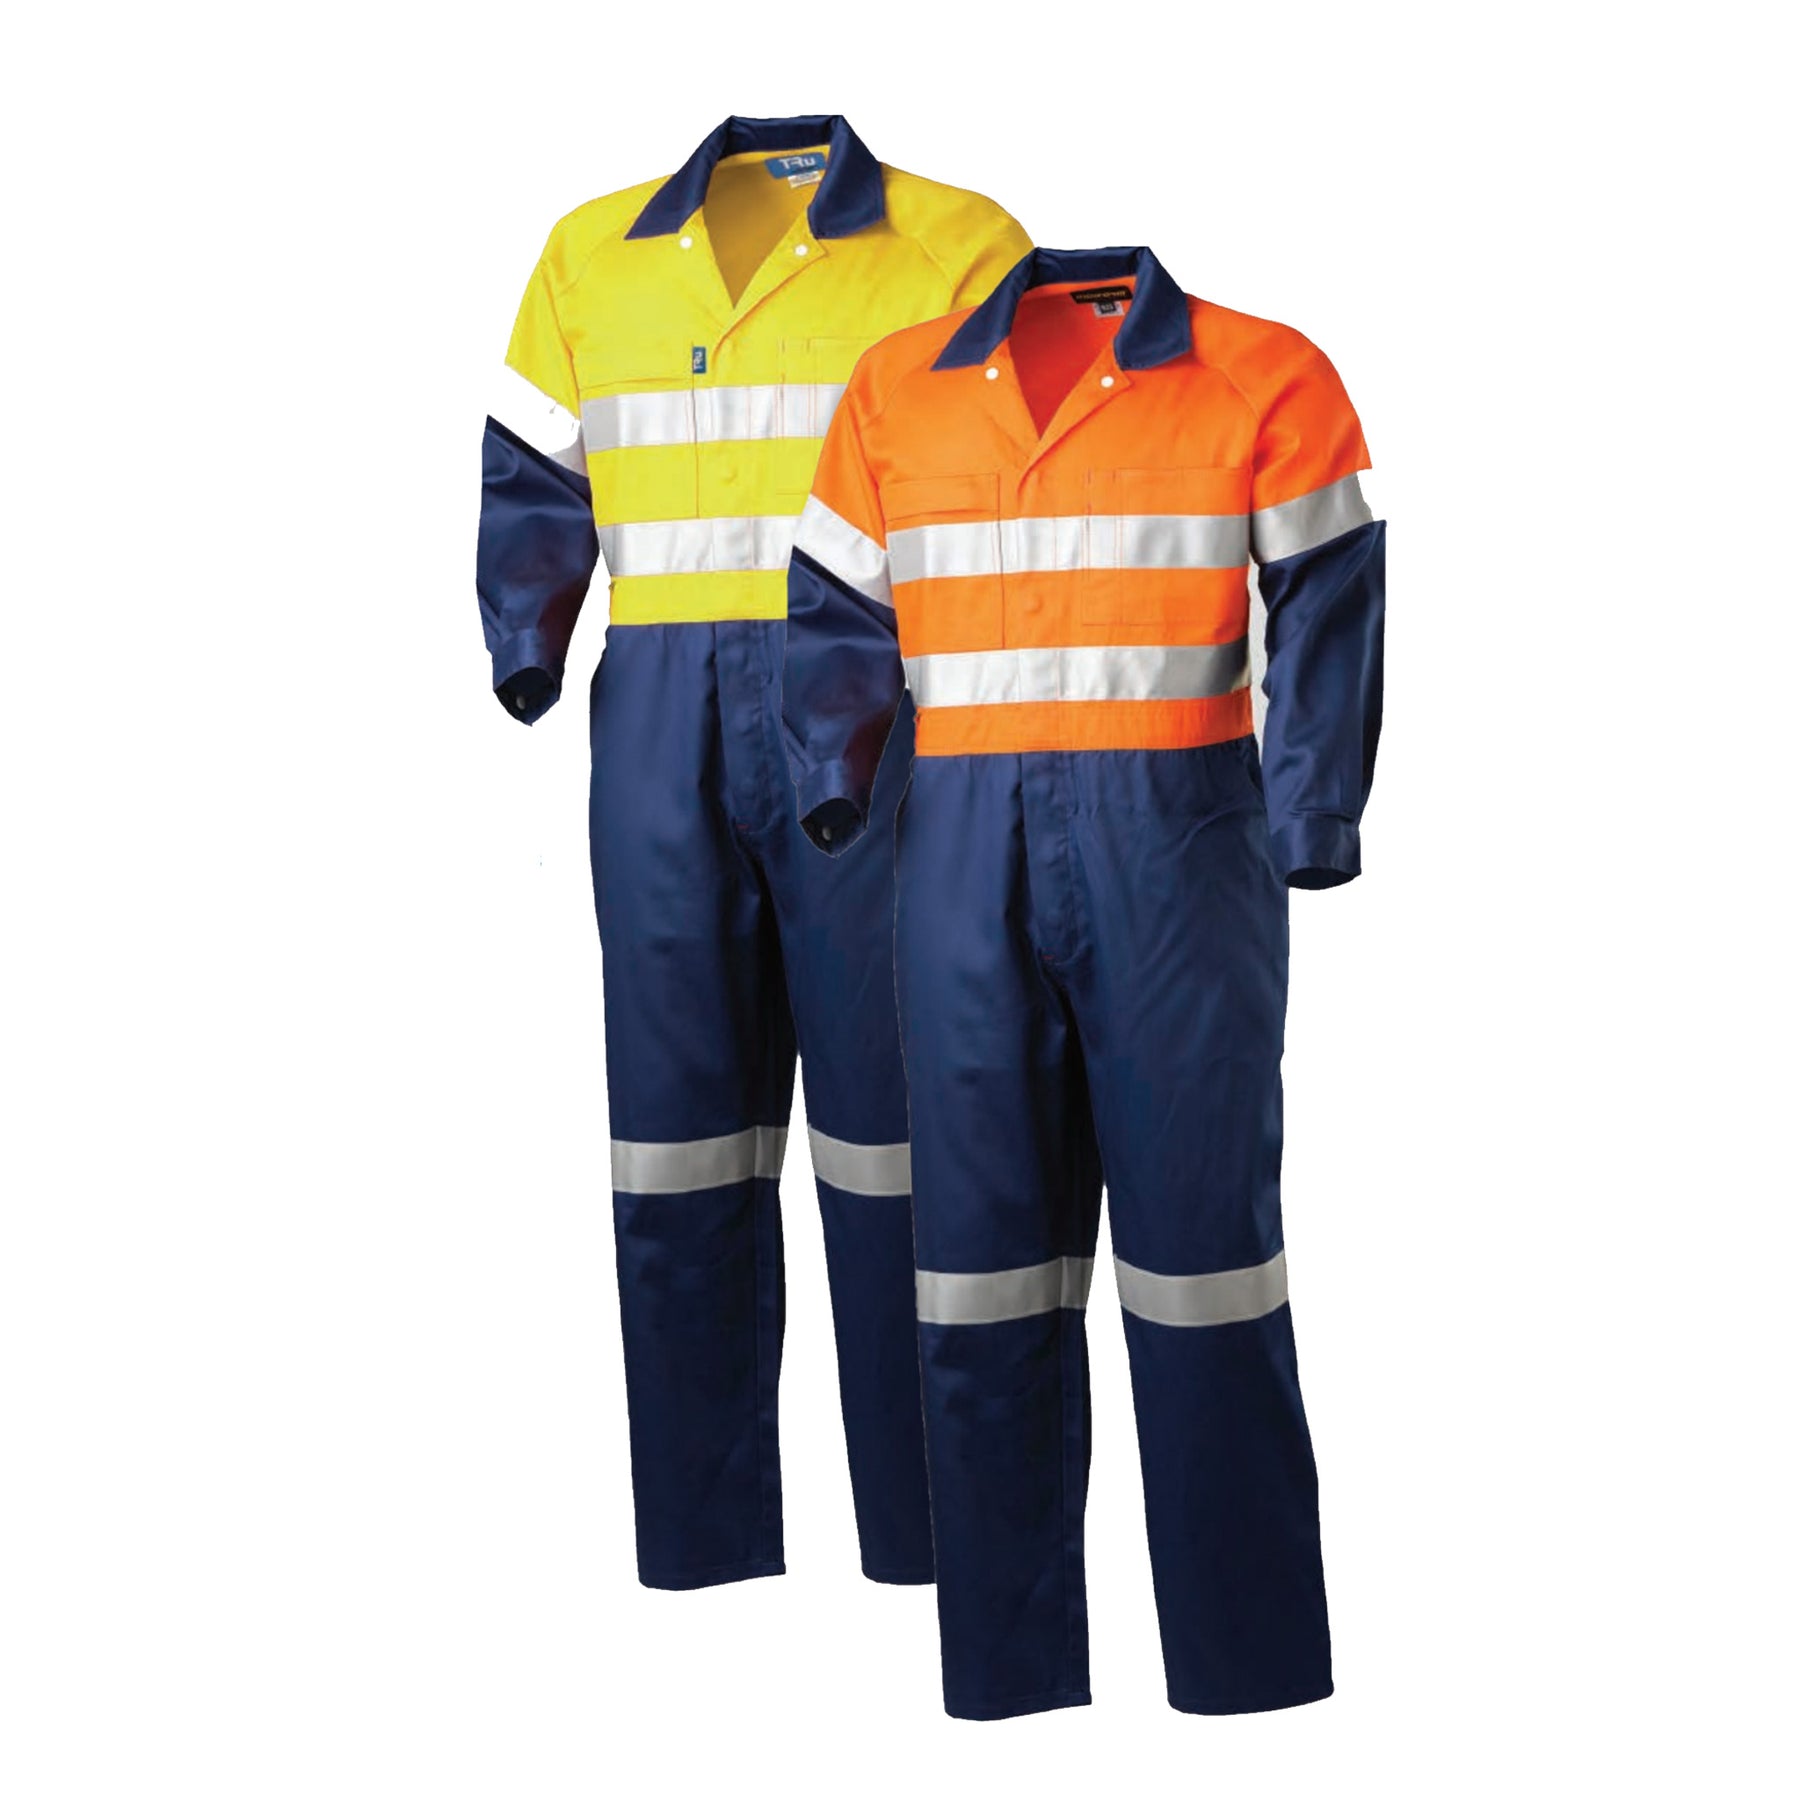 LIGHTWEIGHT HI VIS COTTON COVERALL WITH 3M TAPE - DC2120T1